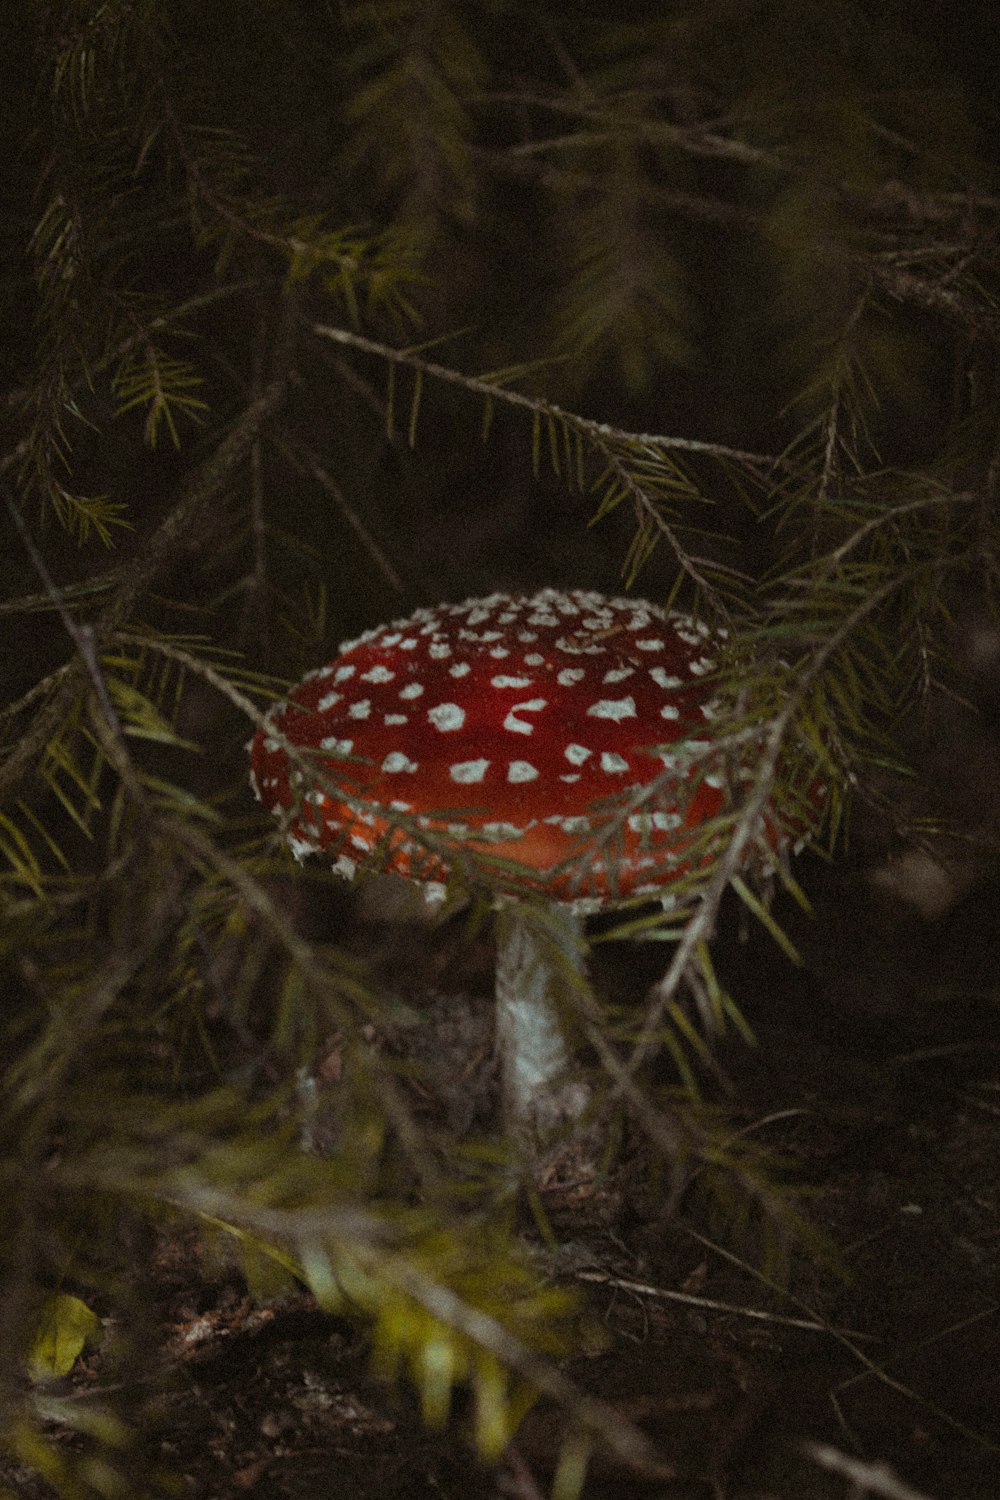 a red mushroom growing in a tree